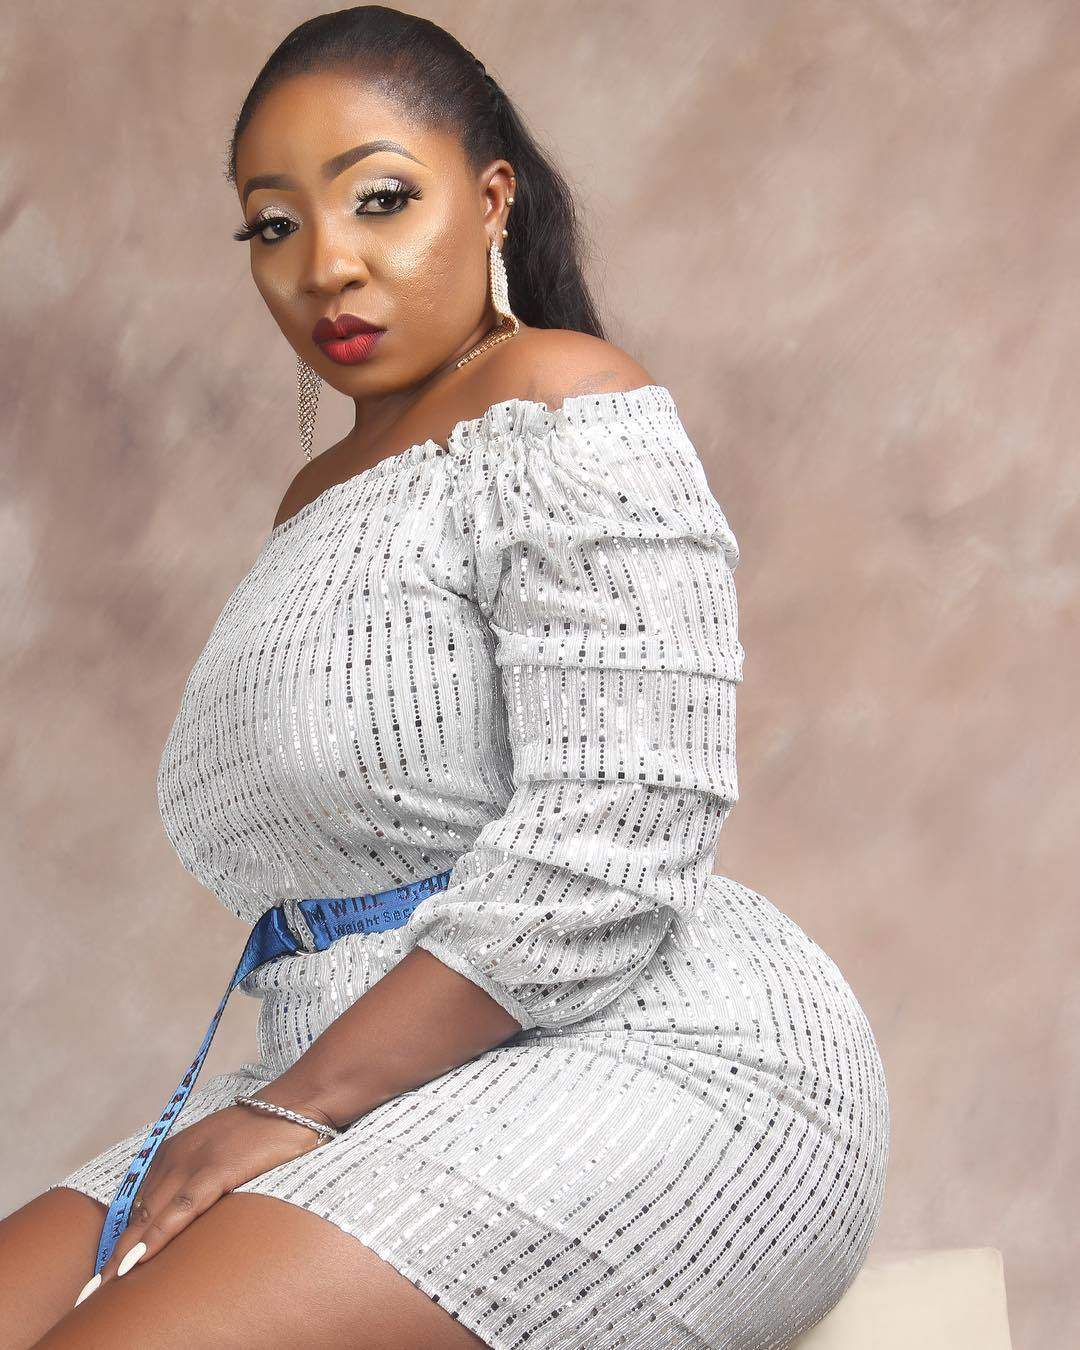 I can never be anyone's second wife - Anita Joseph